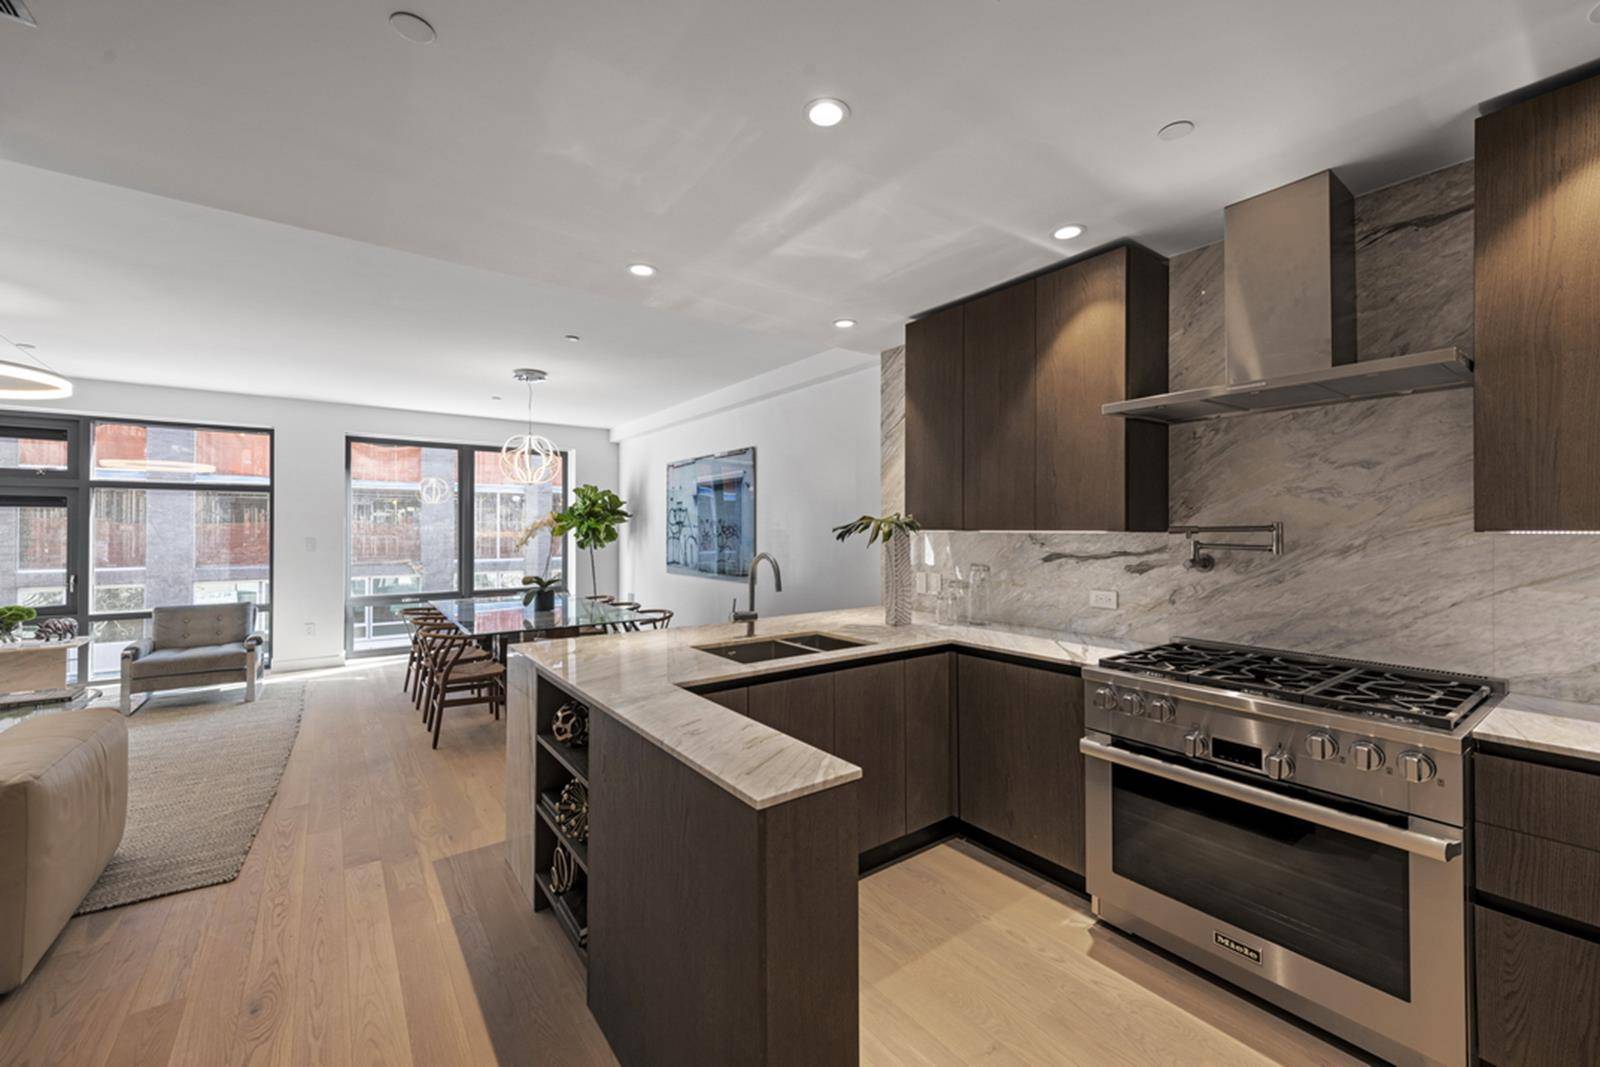 AUGUST 2018 OCCUPANCY Introducing THIRTEEN EAST WEST at 436 and 442 East 13th Street, the first residential building in New York City designed by world renowned architectural firm Tabanlioglu Architects, ...